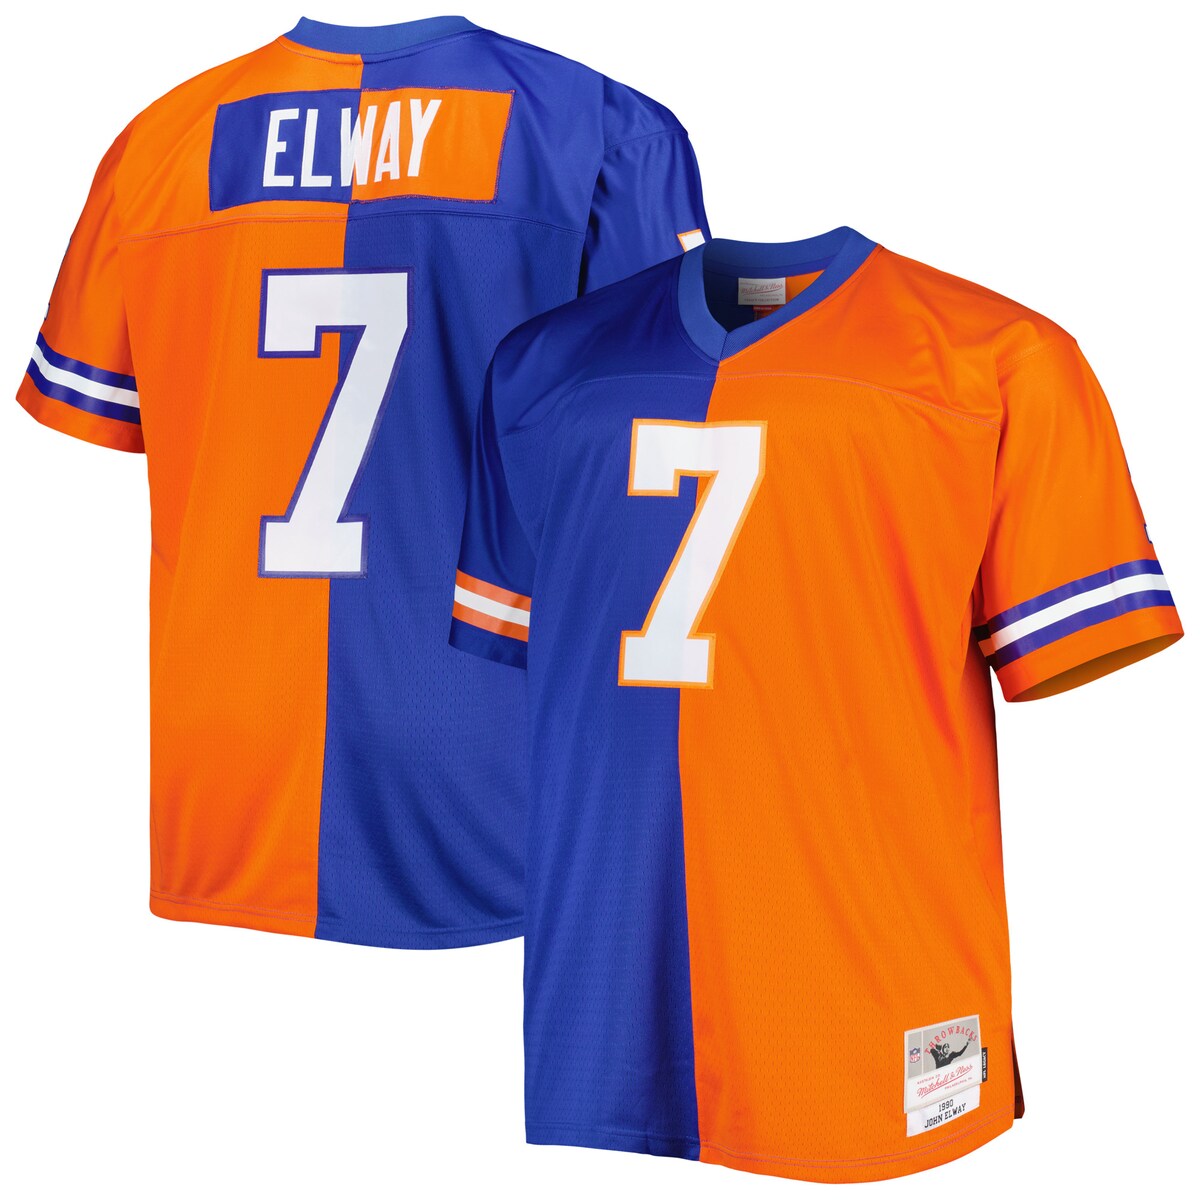 Pay homage to one of the greatest players in NFL history with this John Elway Split Legacy replica jersey from Mitchell & Ness. It features contrasting Denver Broncos colors, as well as John Elway's name and number featured on the front and back, making this the perfect option for you to remember all of his achievements while playing for the Denver Broncos. The droptail hem with side splits adds a layer of style while the mesh bodice brings breathability to your day.Material: 100% PolyesterOfficially licensedMachine wash, line dryRib-knit collarBrand: Mitchell & NessMesh bodiceV-neckHeat-sealed graphicsReplica Throwback JerseyWoven jock tag on bottom left hemImportedSide splits at hemTackle twill applique